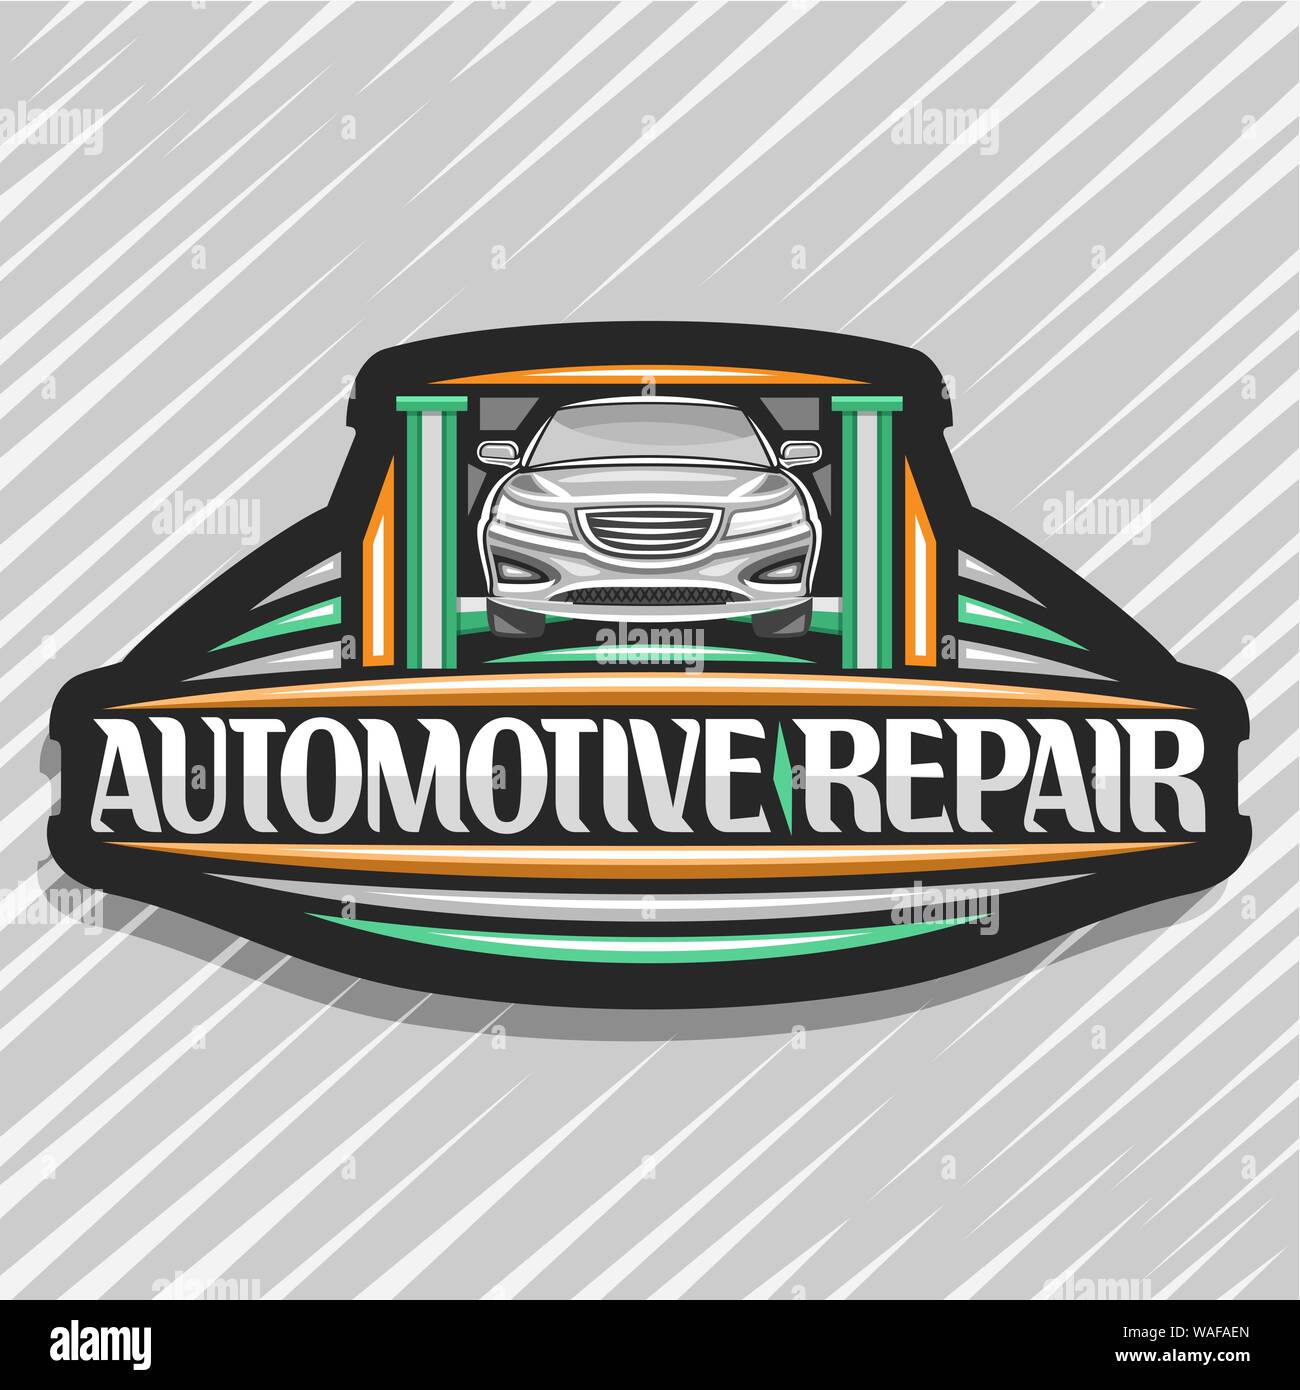 Vector logo for Automotive Repair, black decorative sign board with vehicle on green elevator for diagnostic, original lettering for words automotive Stock Vector